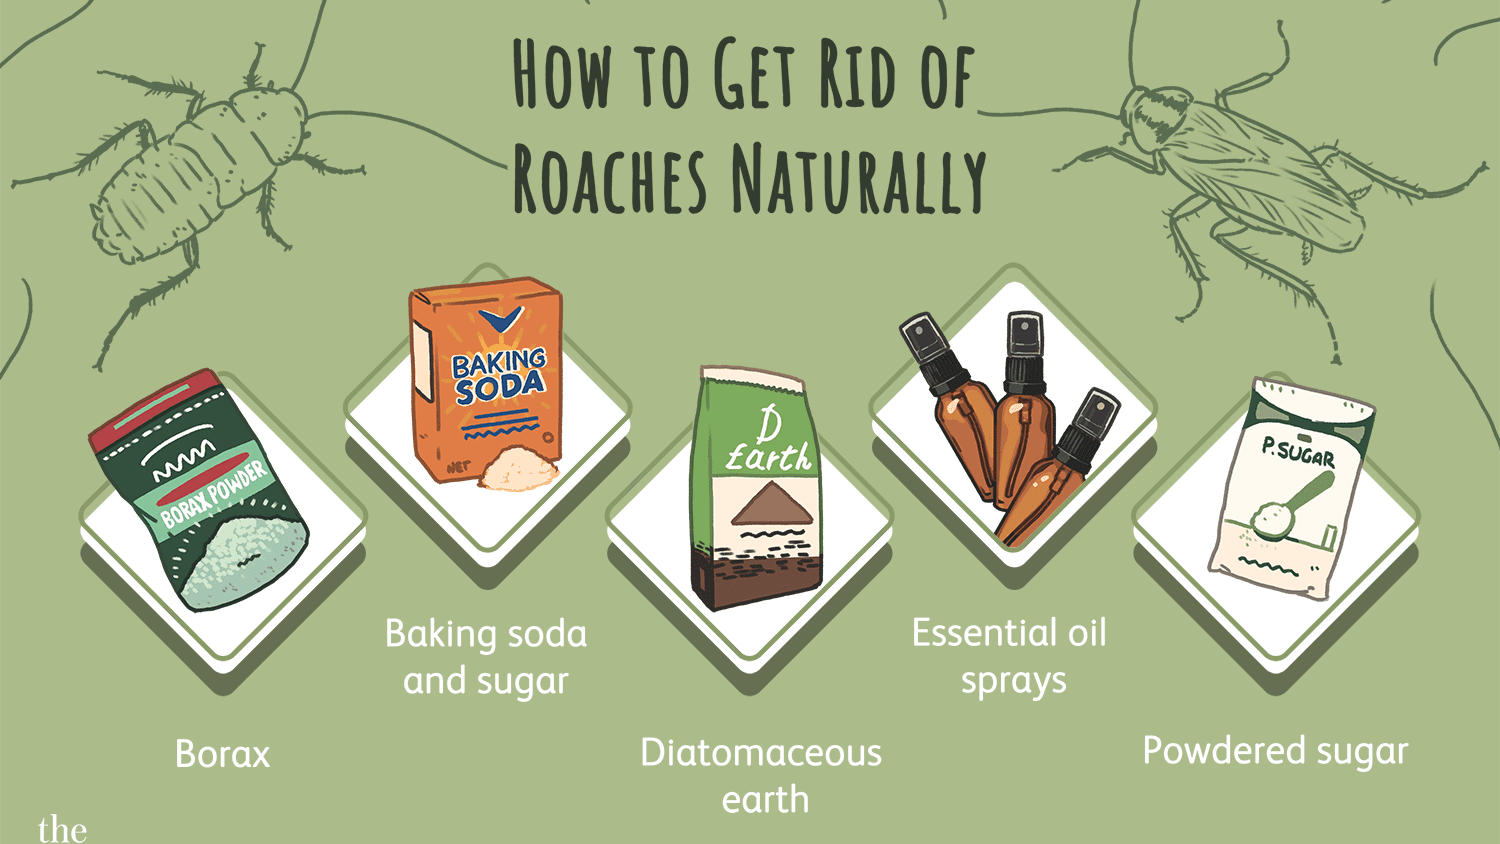 How to get rid of roaches naturally at home?